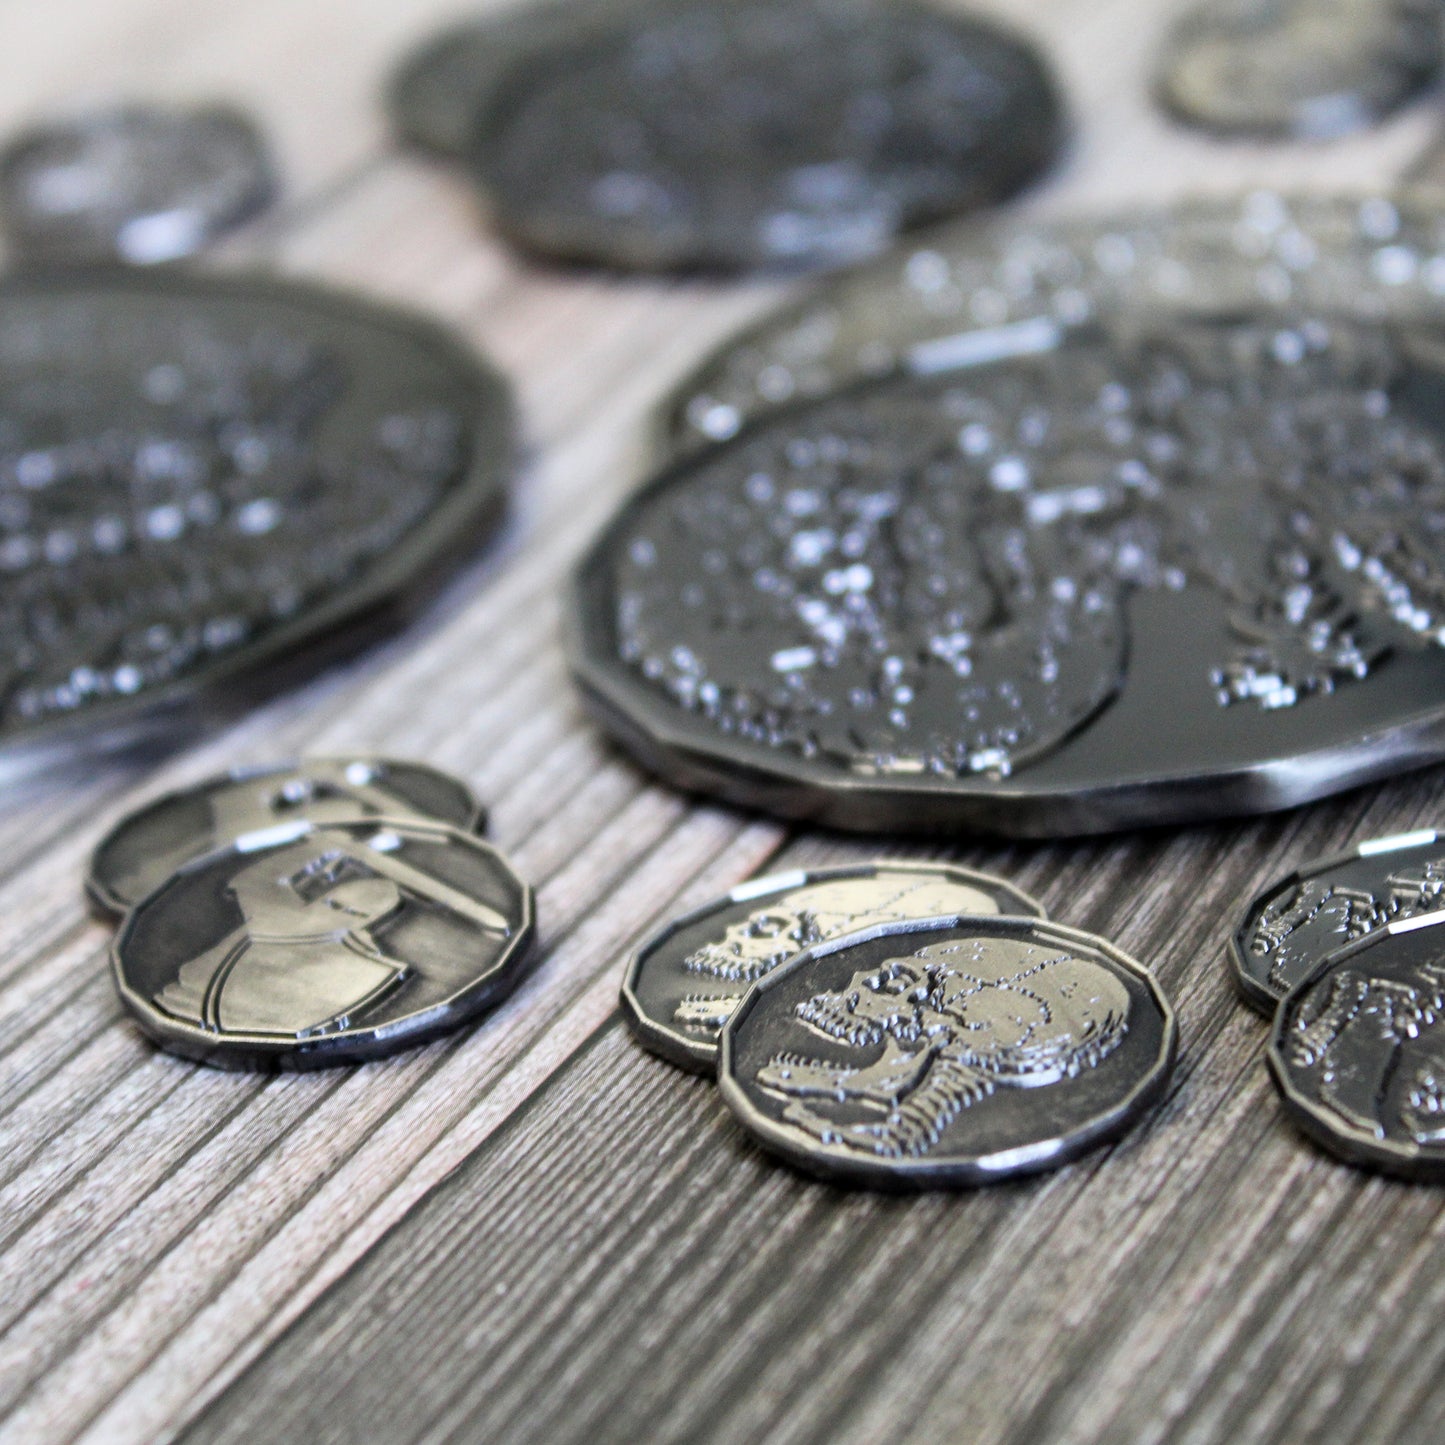 Monster coins are perfectly sized for 1” battle mats and grids.